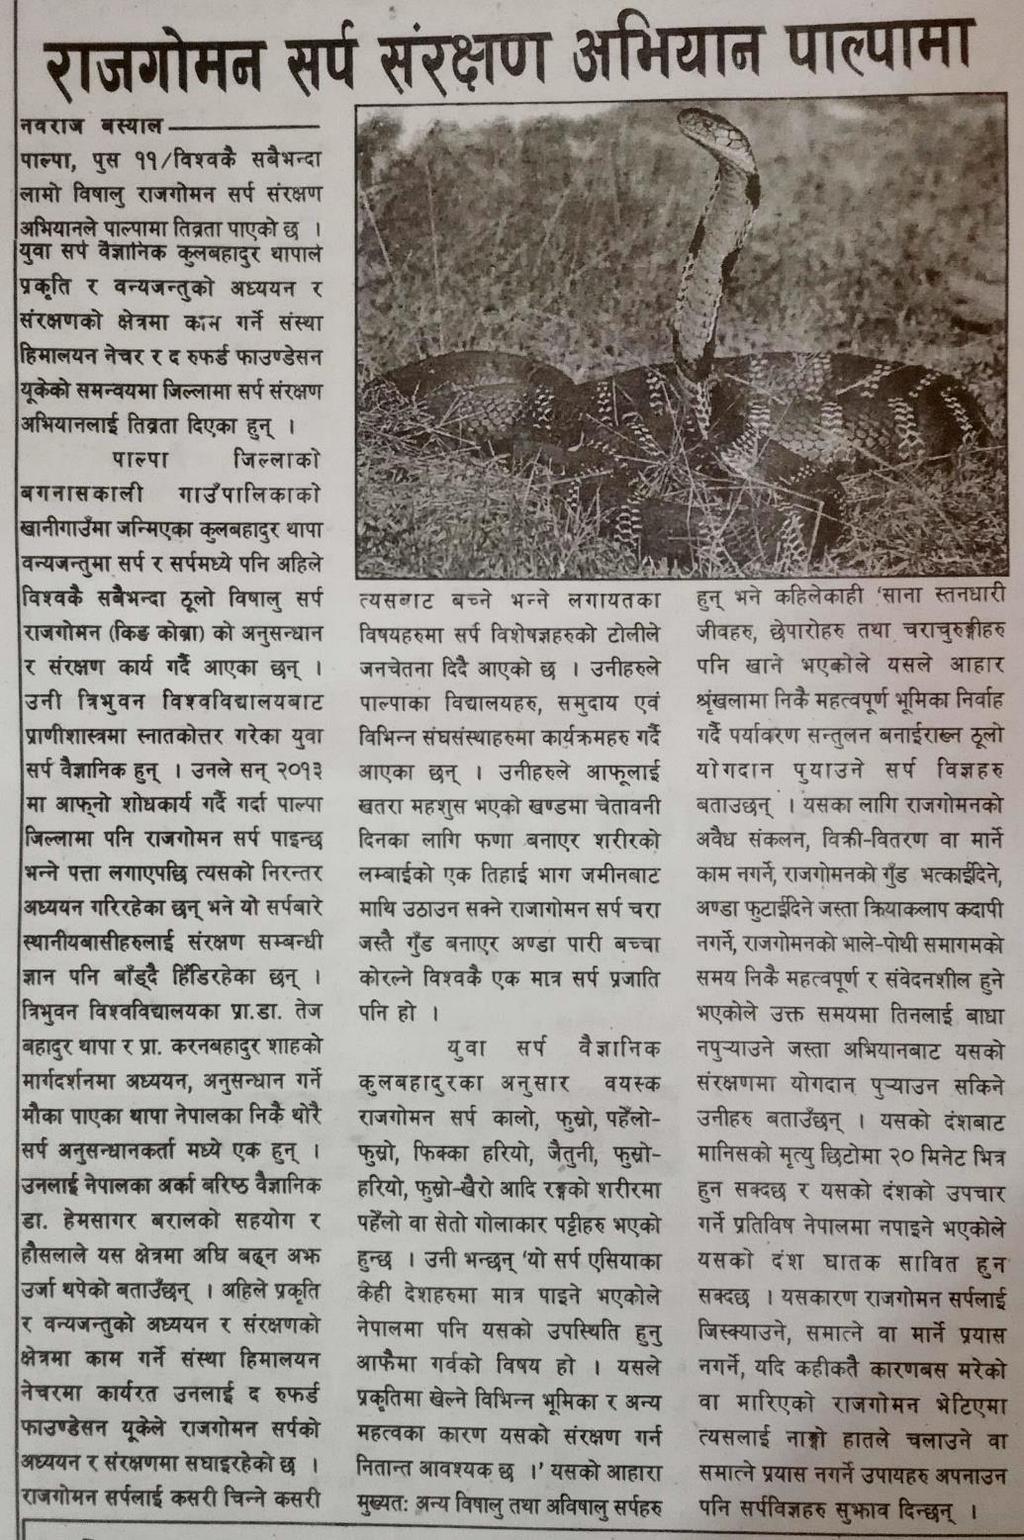 Some glimpse of coverage by print media. Acknowledgement I would like to acknowledge The Rufford Foundation for the grant, Prof. Dr. Tej Bahadur Thapa, Prof. Dr. Notker Helfenberger and Dr.